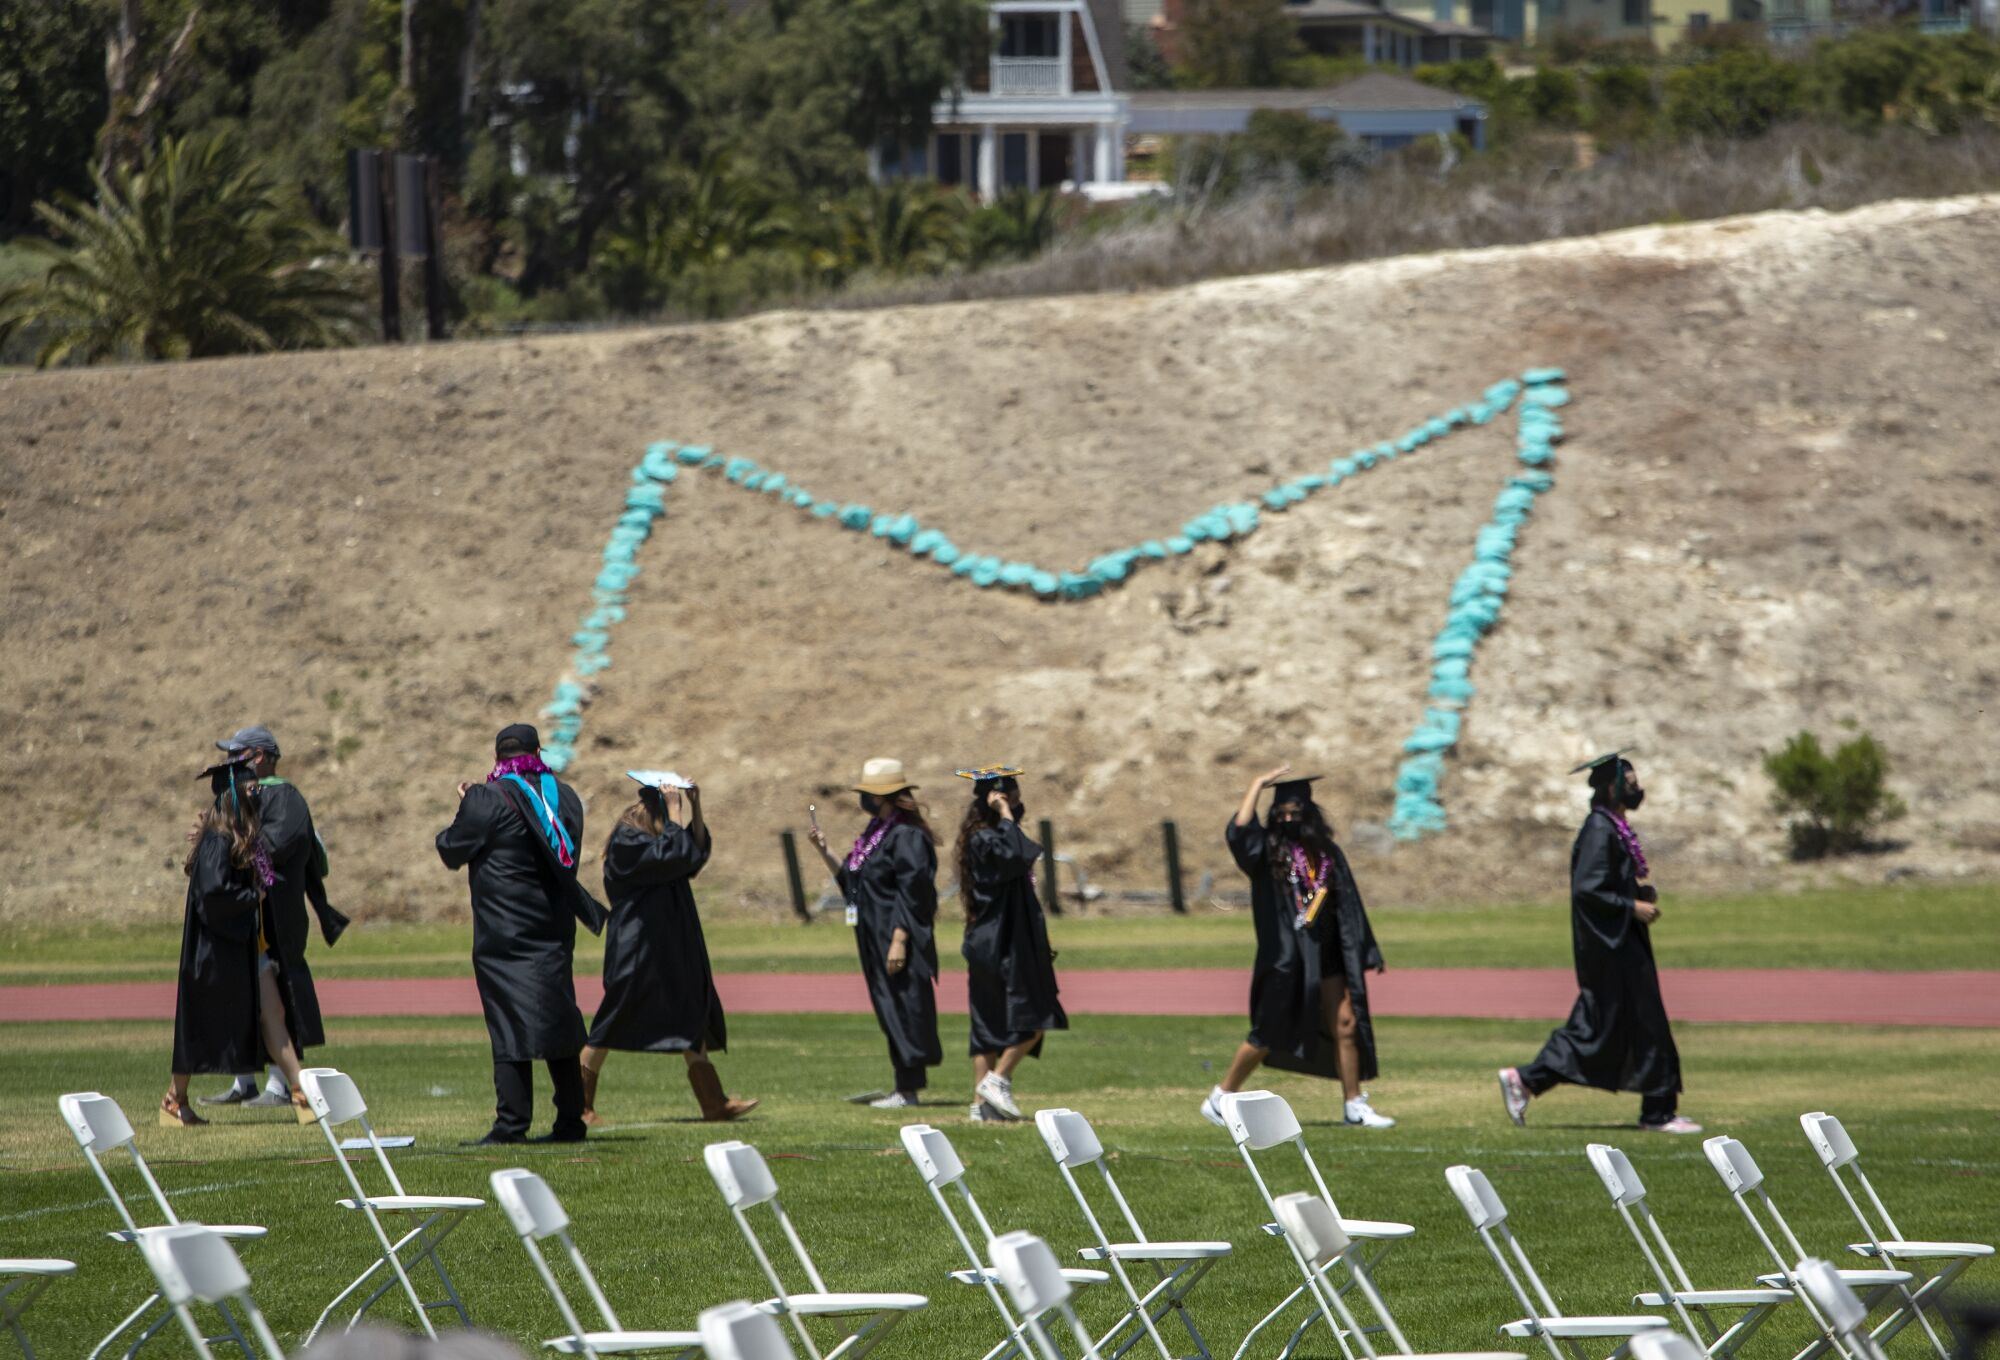 Students walk in caps and gowns alongside rows of folding chairs. In the background, rocks form an "M" on a hillside.